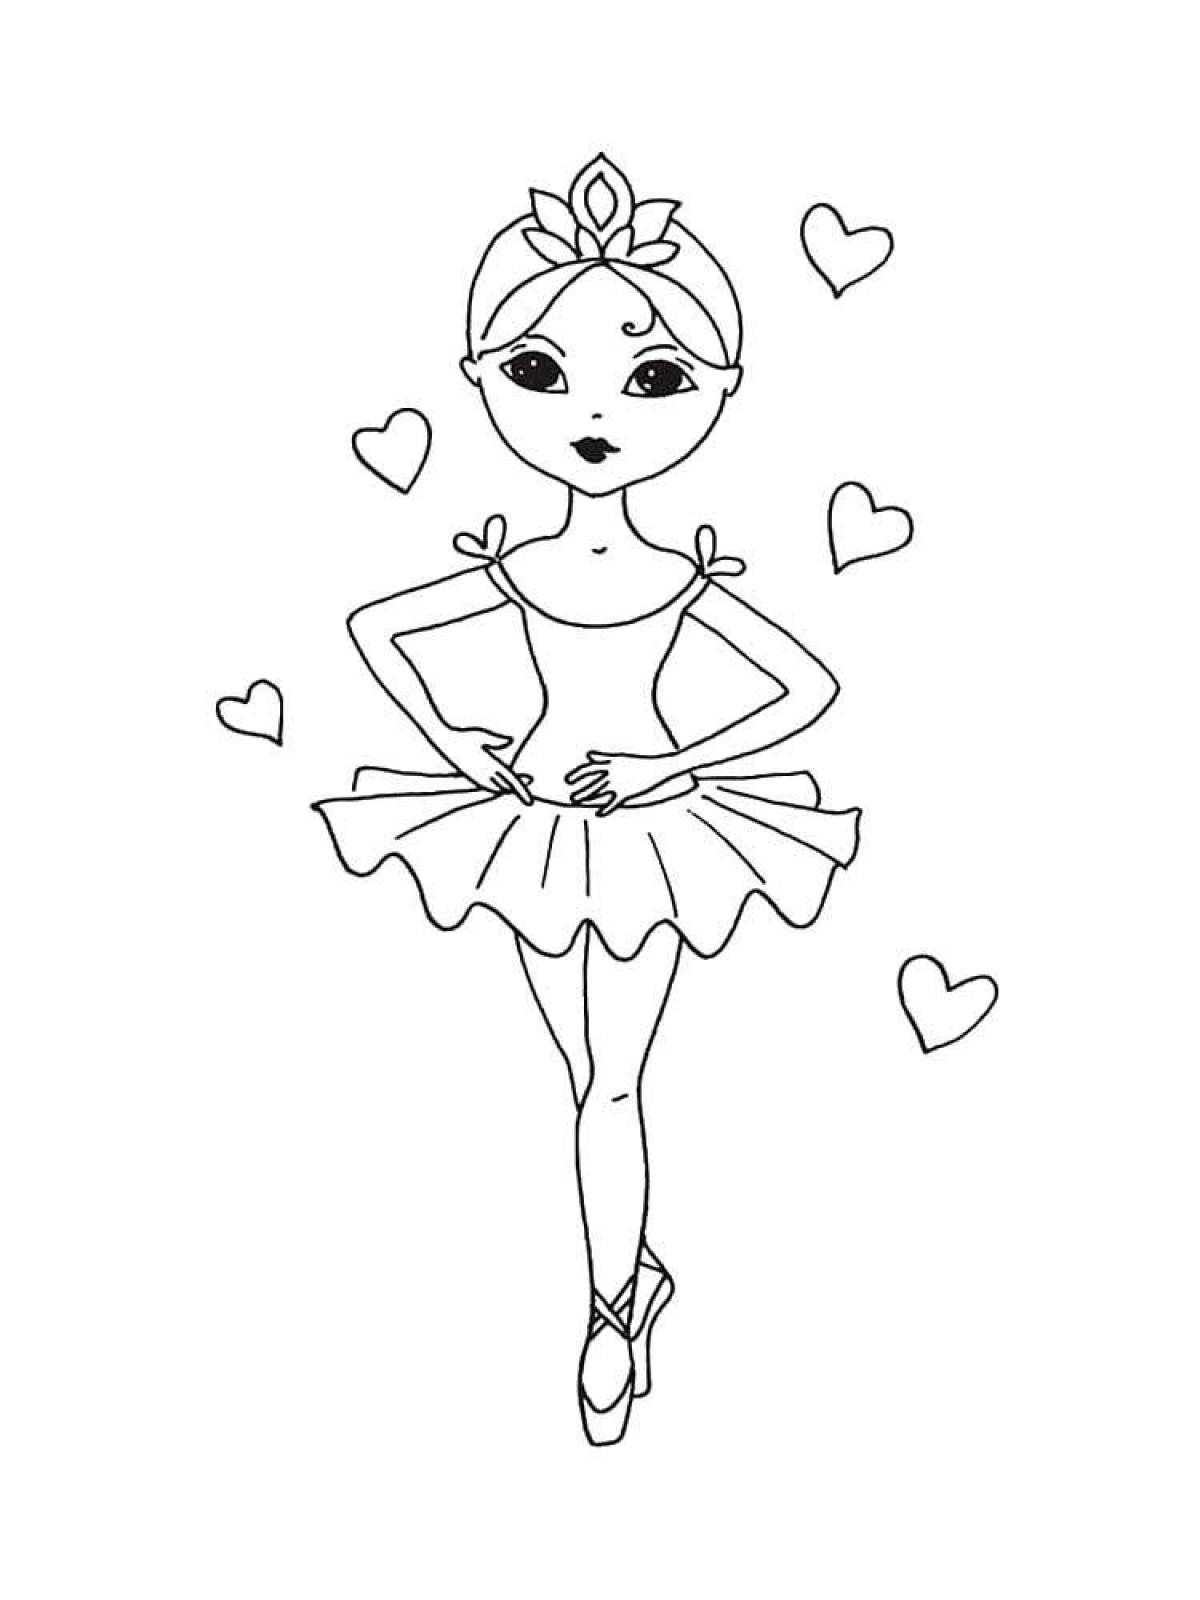 Inspiring ballerina coloring pages for kids